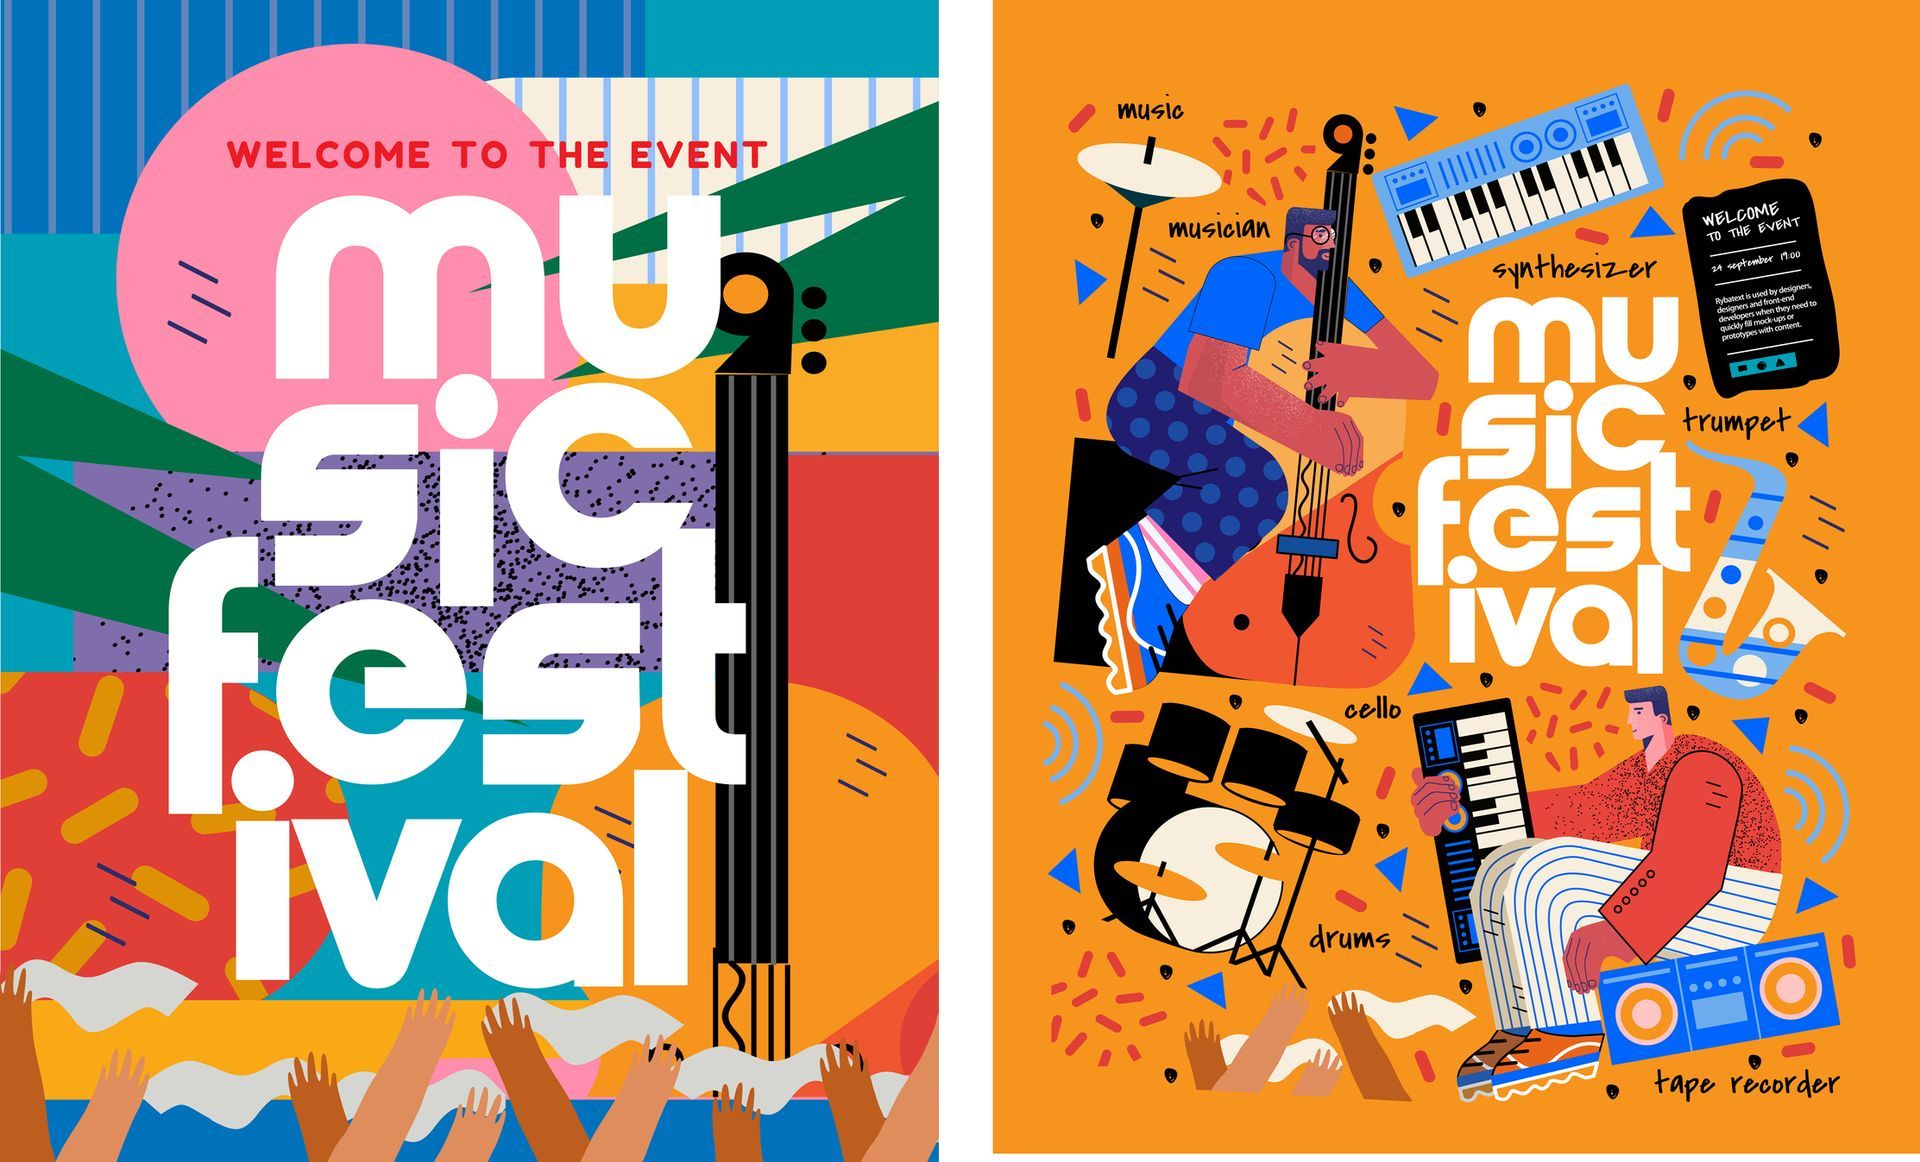 Music Festival Flyers Printed In Orange County, CA